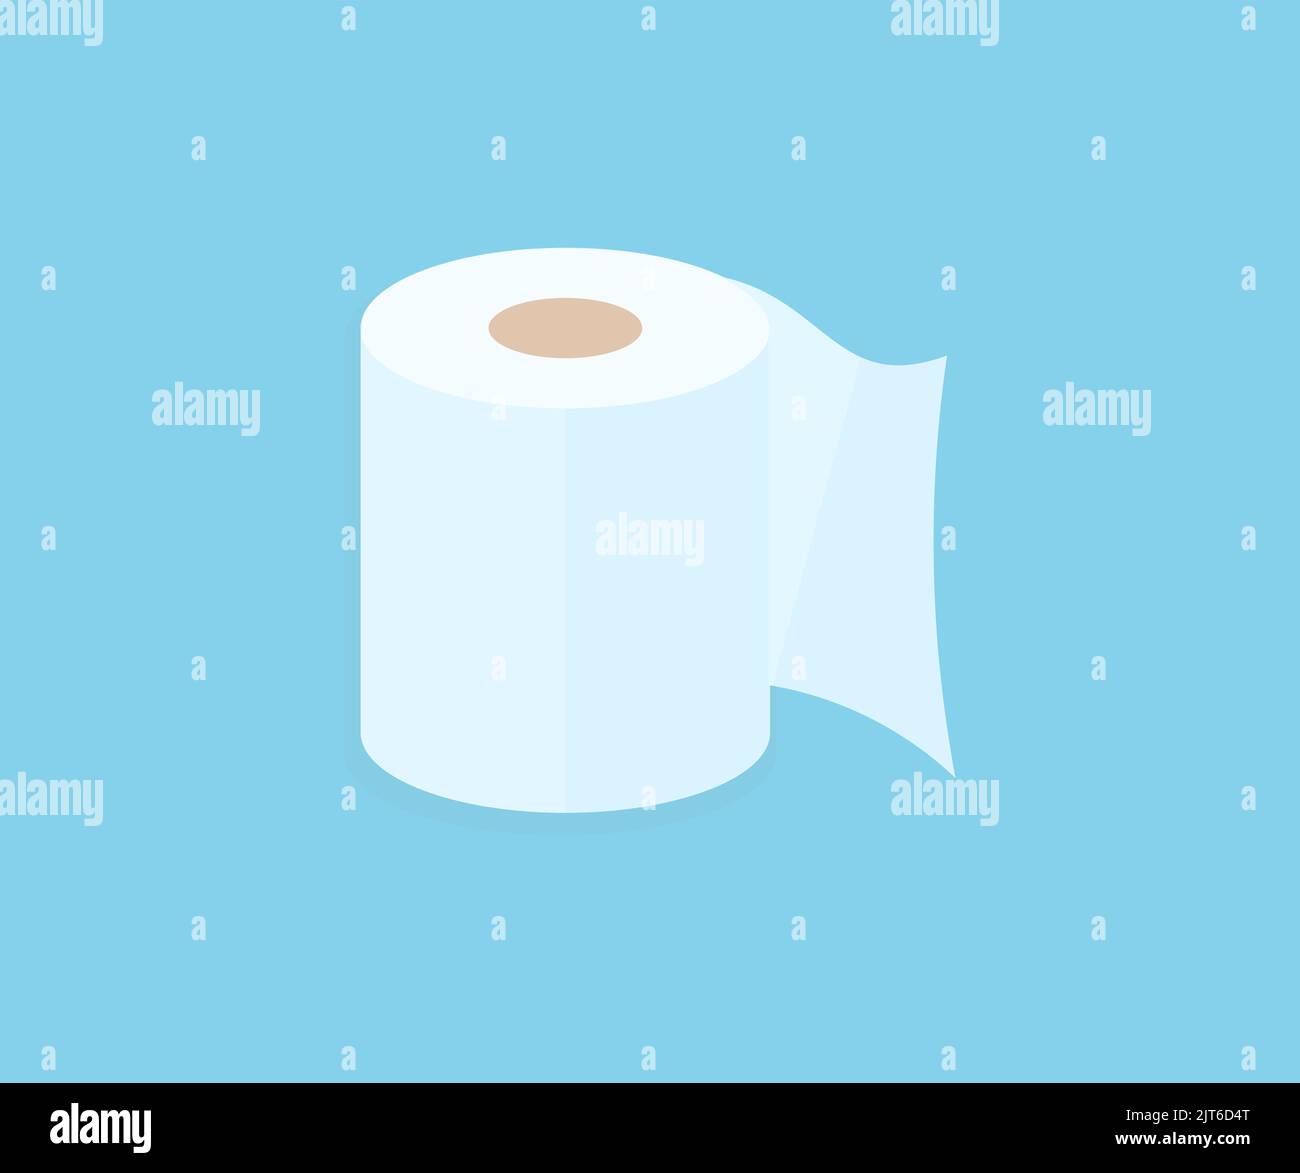 Unwound roll of toilet paper logo design. One toilet paper roll isolated on blue background vector design and illustration. Stock Vector